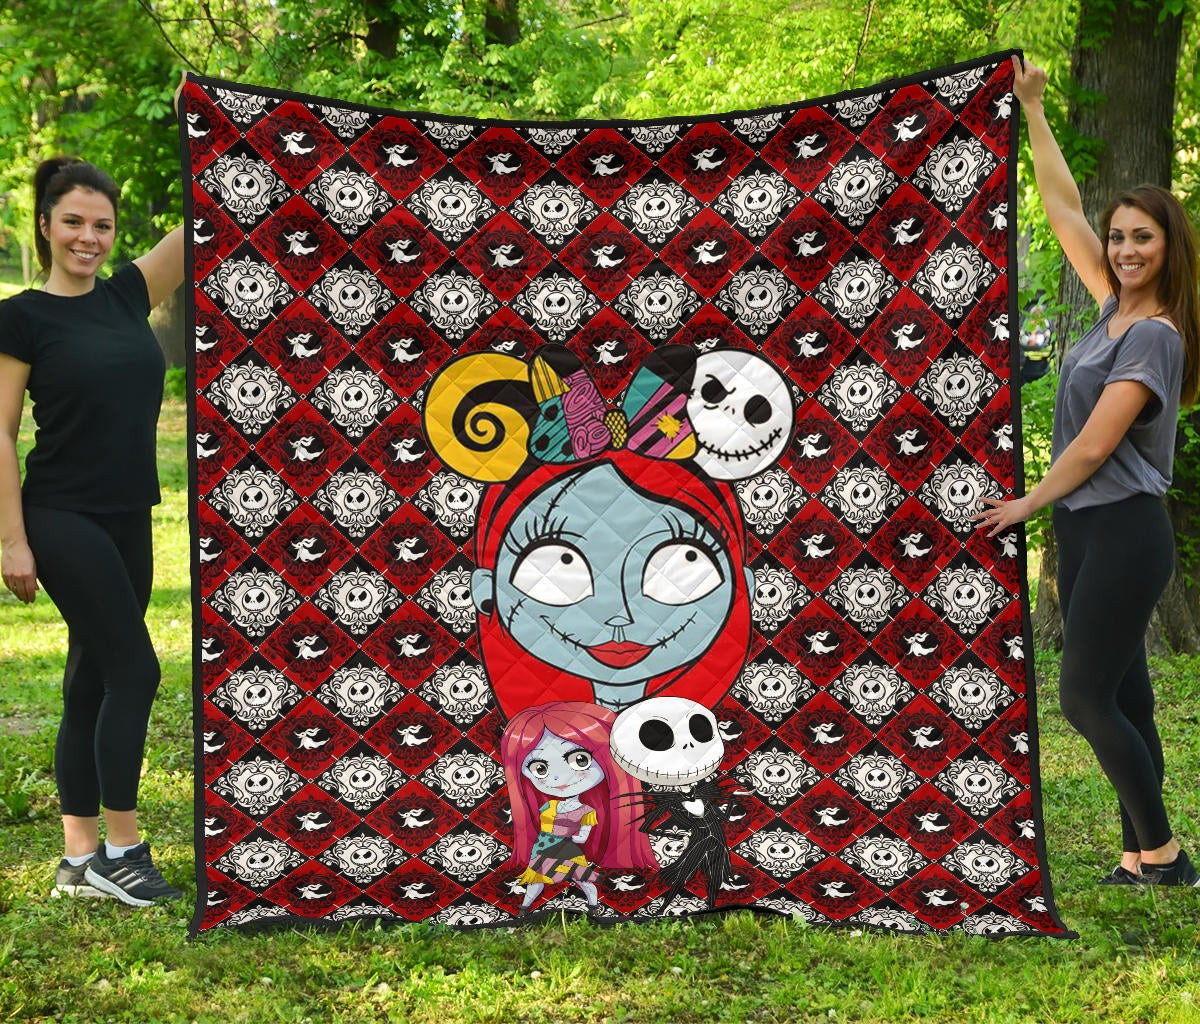 The Nightmare Before Christmas Cartoon Premium Quilt | Cute Sally Face Chibi Jack Sally Couple Quilt Blanket